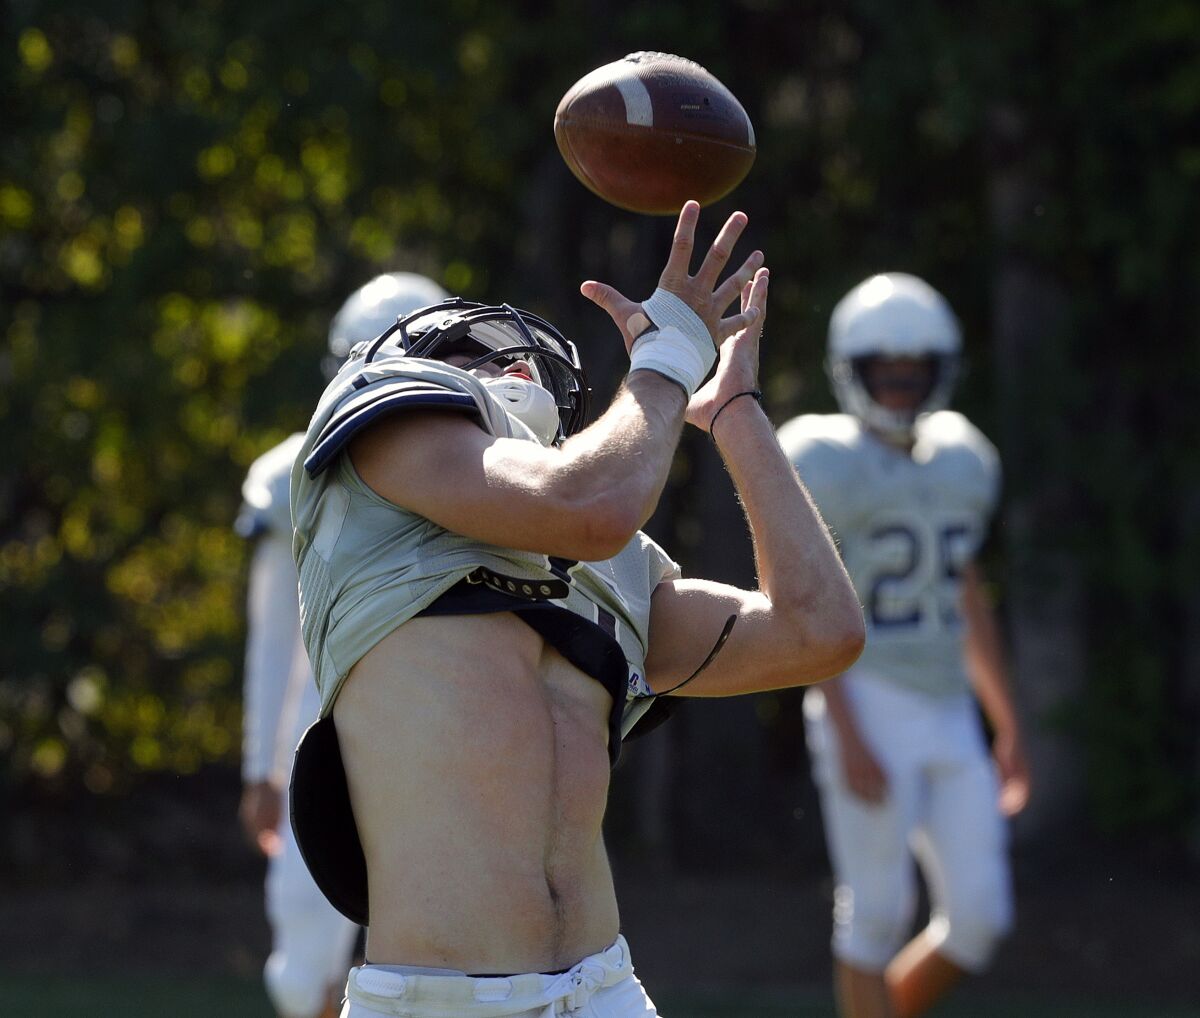 Flintridge Prep's Ben Grable looks back over his shoulder for a pass as it drops over his shoulder into his arms during a passing drill at pre-season football practice at Flintridge Prep on Monday, August 19, 2019.